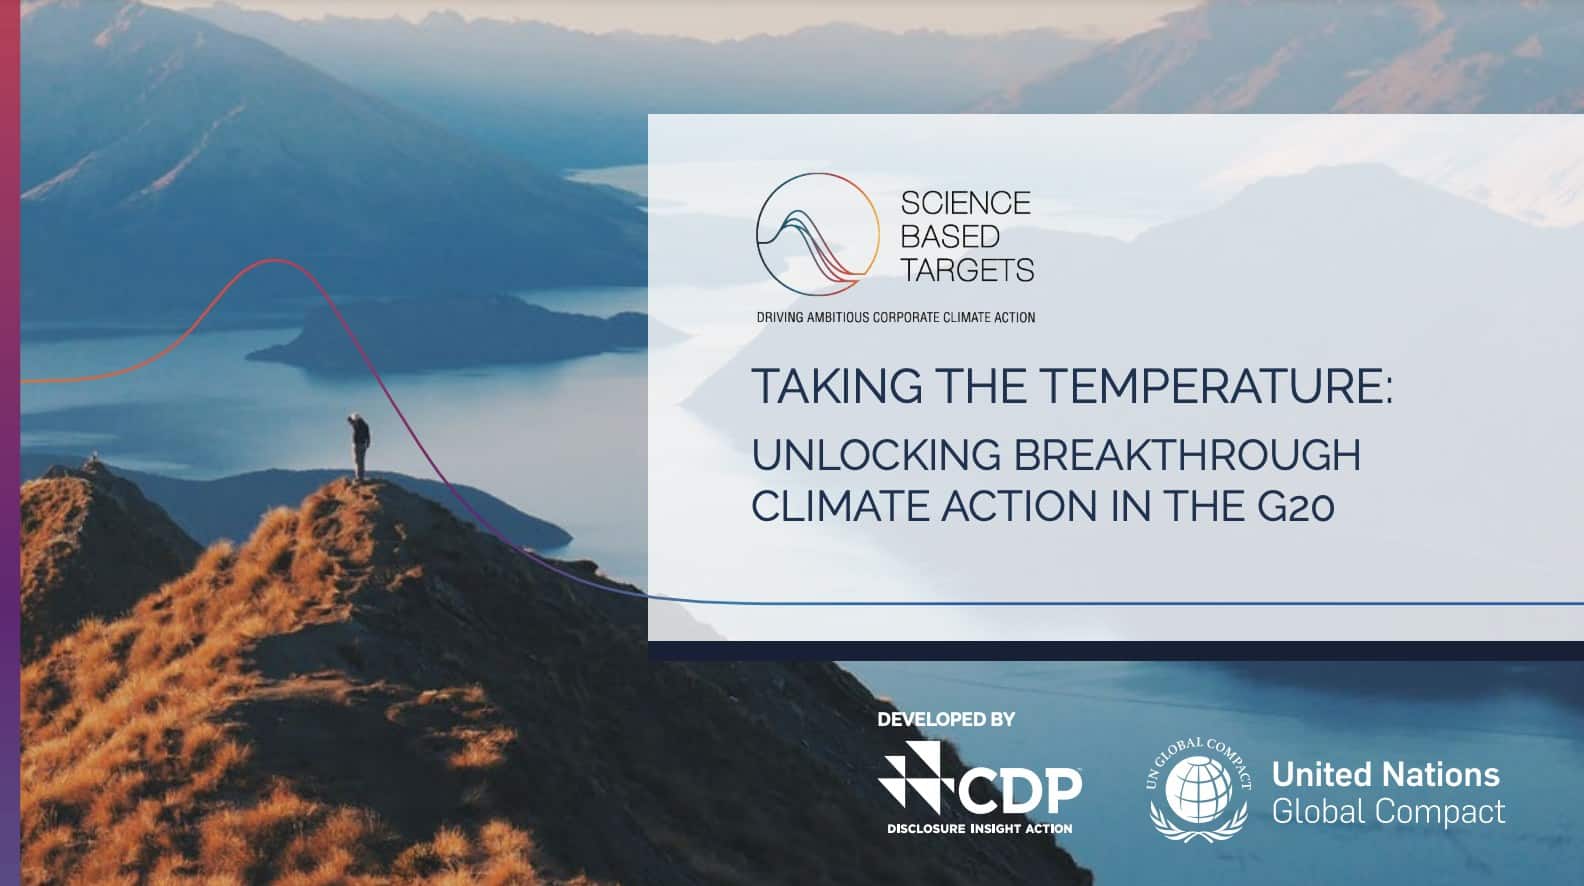 "Science Based Targets, Taking the temperature: unlocking breakthrough climate action in the G20."